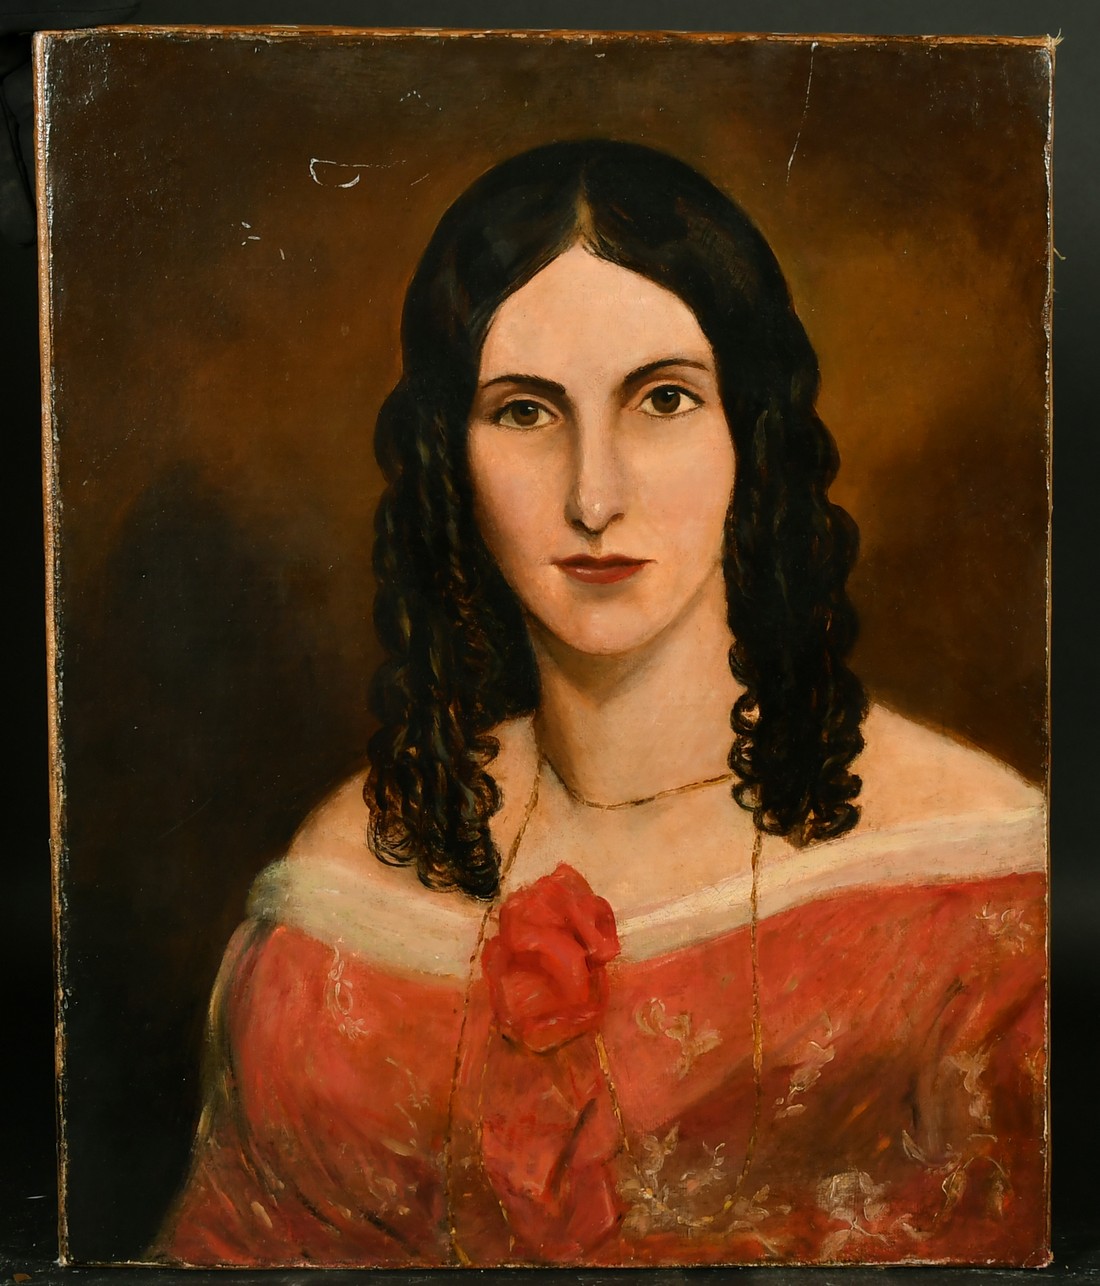 Late 19th Century English School, Portrait of a young lady with ringlets and wearing a red dress, - Image 2 of 3